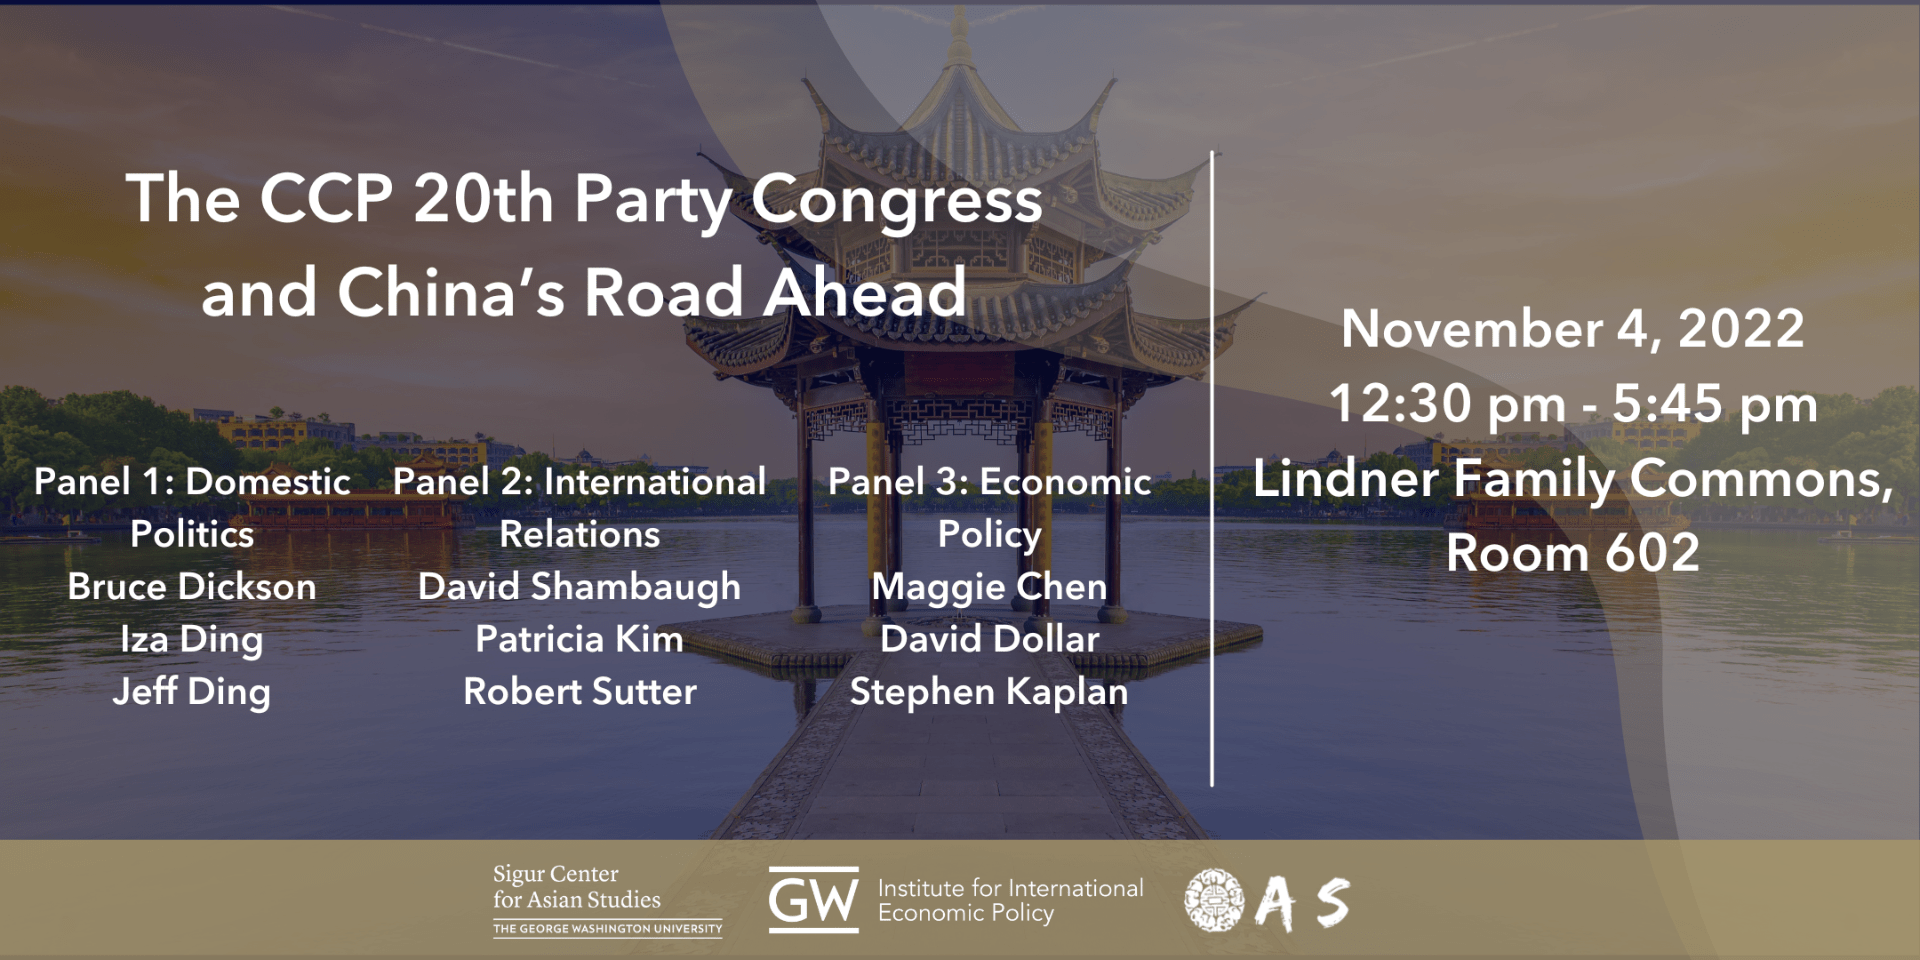 An event graphic for "The CCP 20th Party Congress and China's Road Ahead"